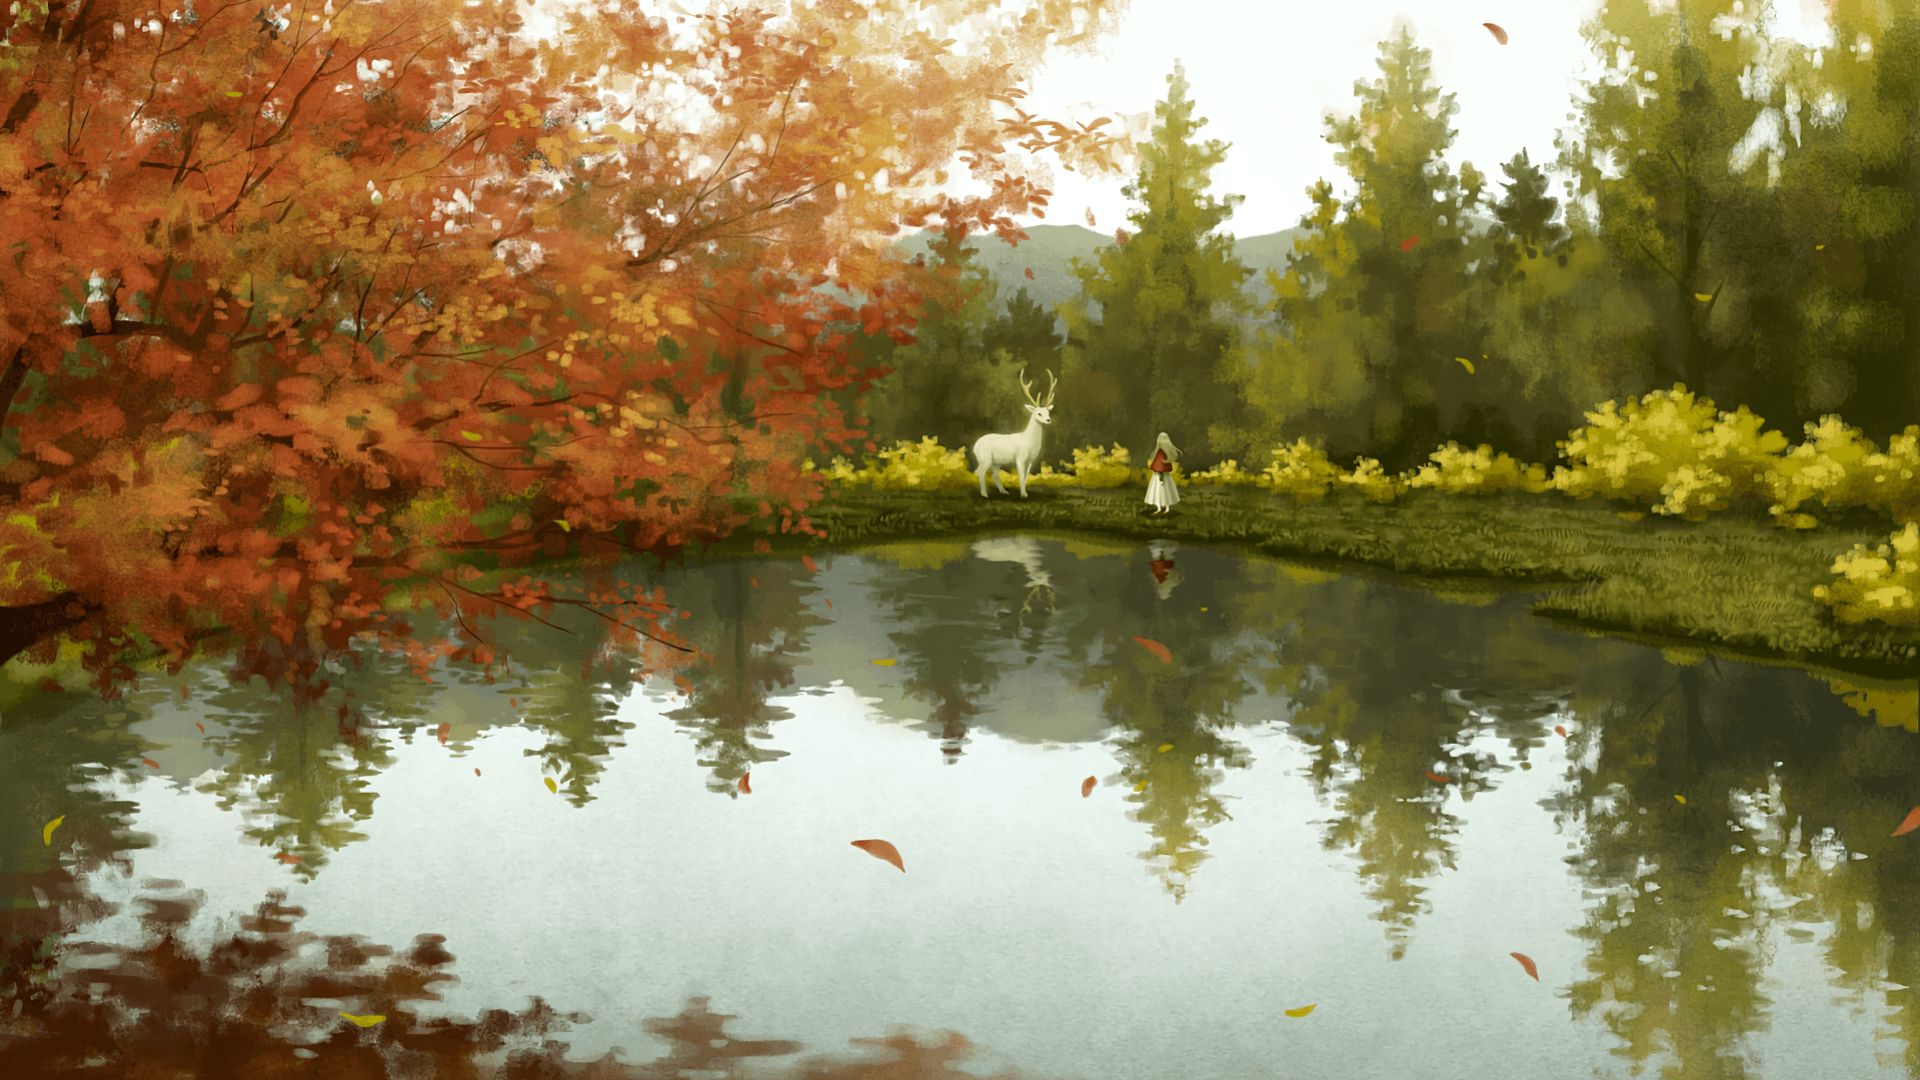 Download 1920x1080 Anime Girl, Deer, Forest, Reflection, Lake